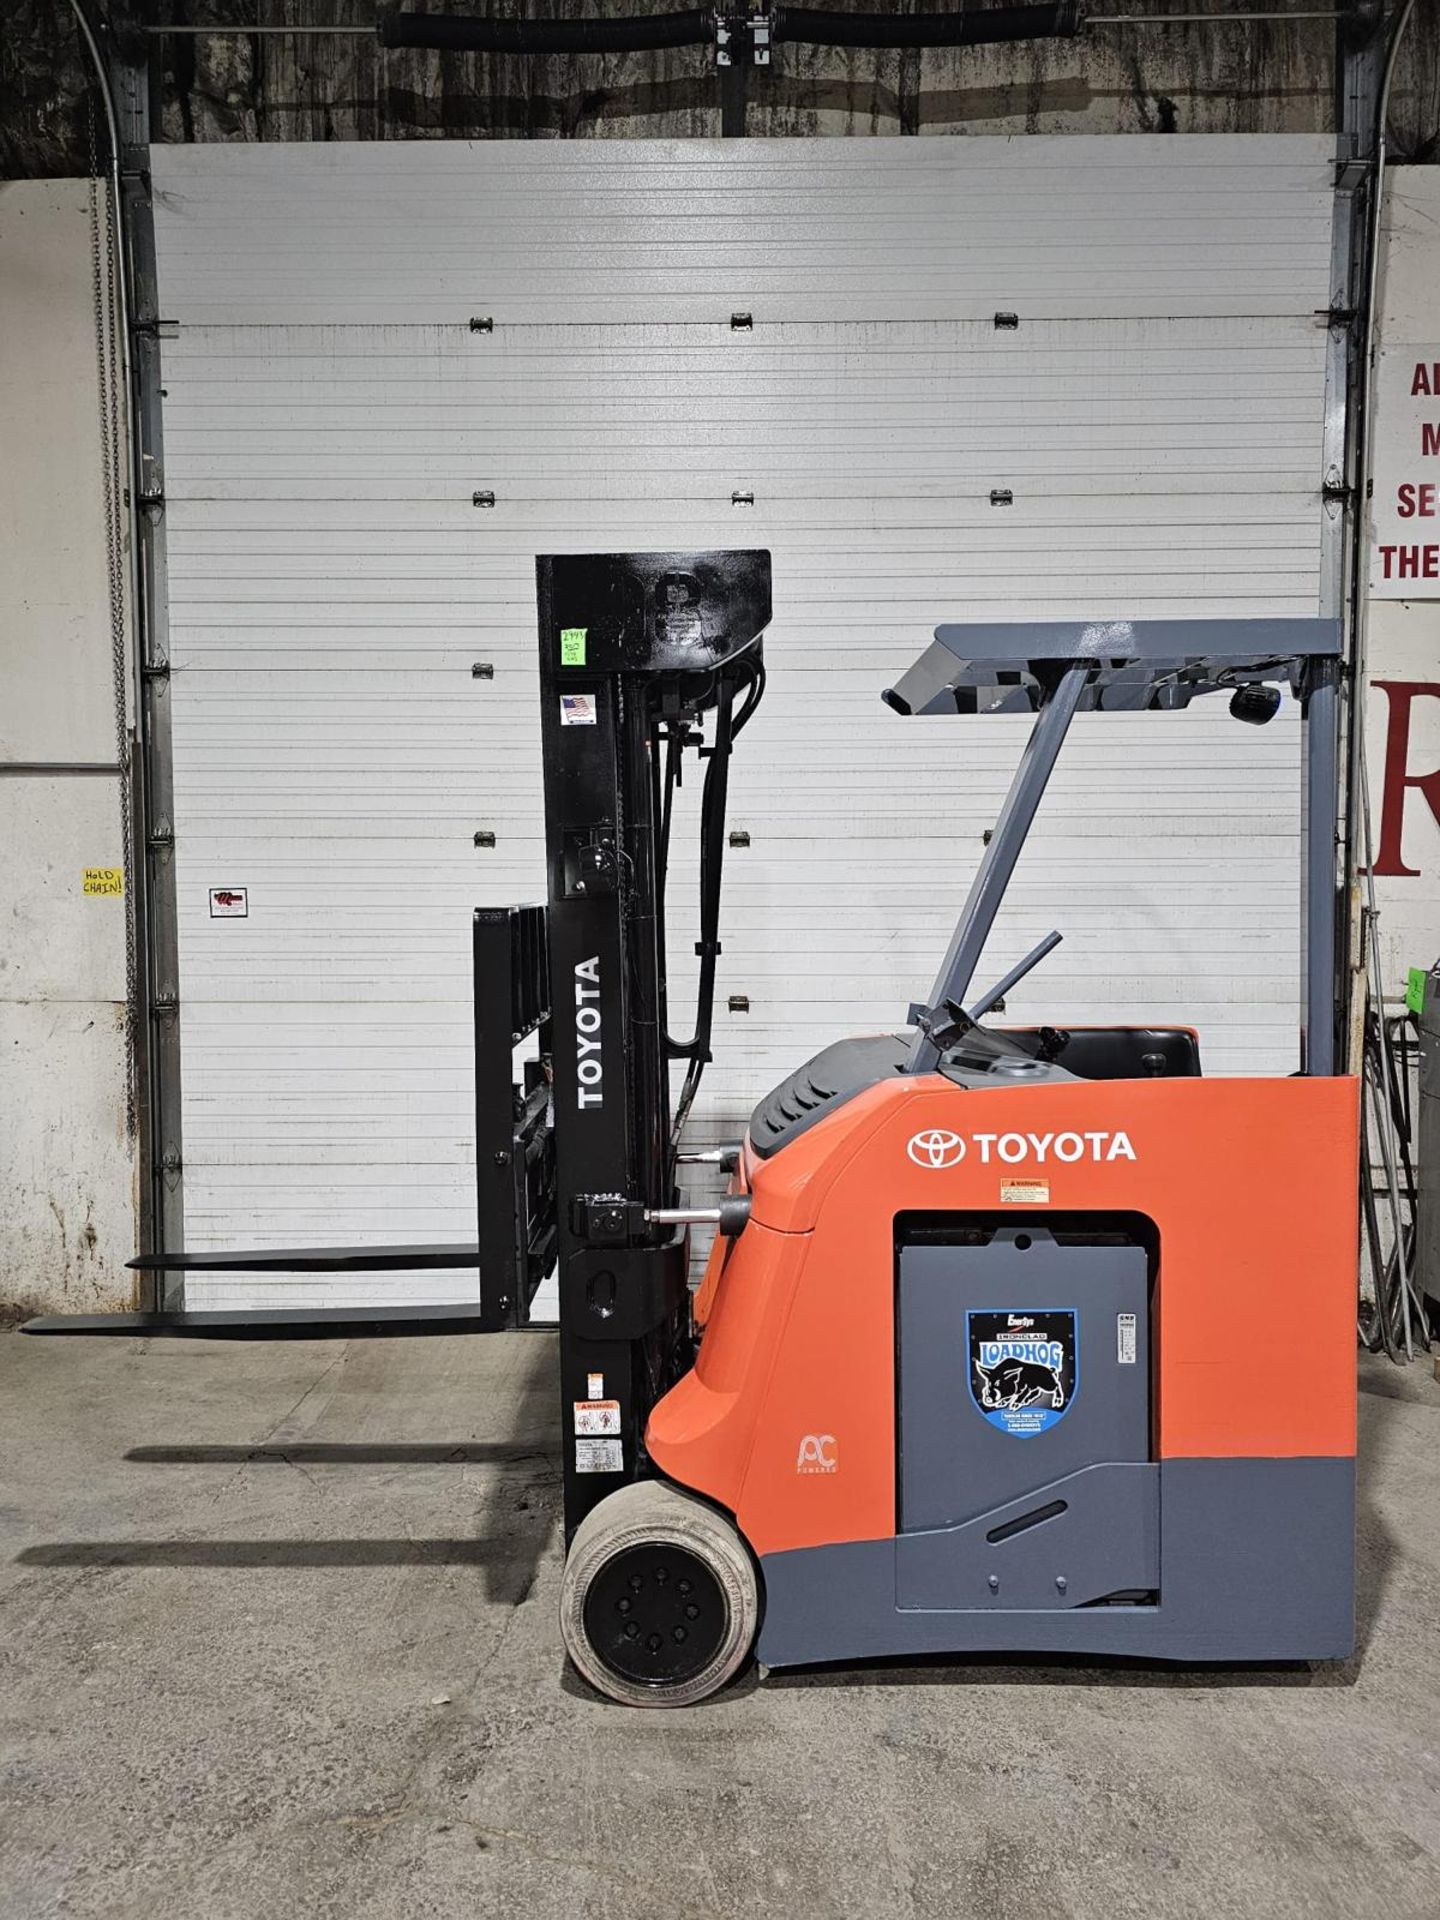 2017 Toyota 4,000lbs Capacity Electric Stand-on Forklift 36v with sideshift 4-stage mast with non